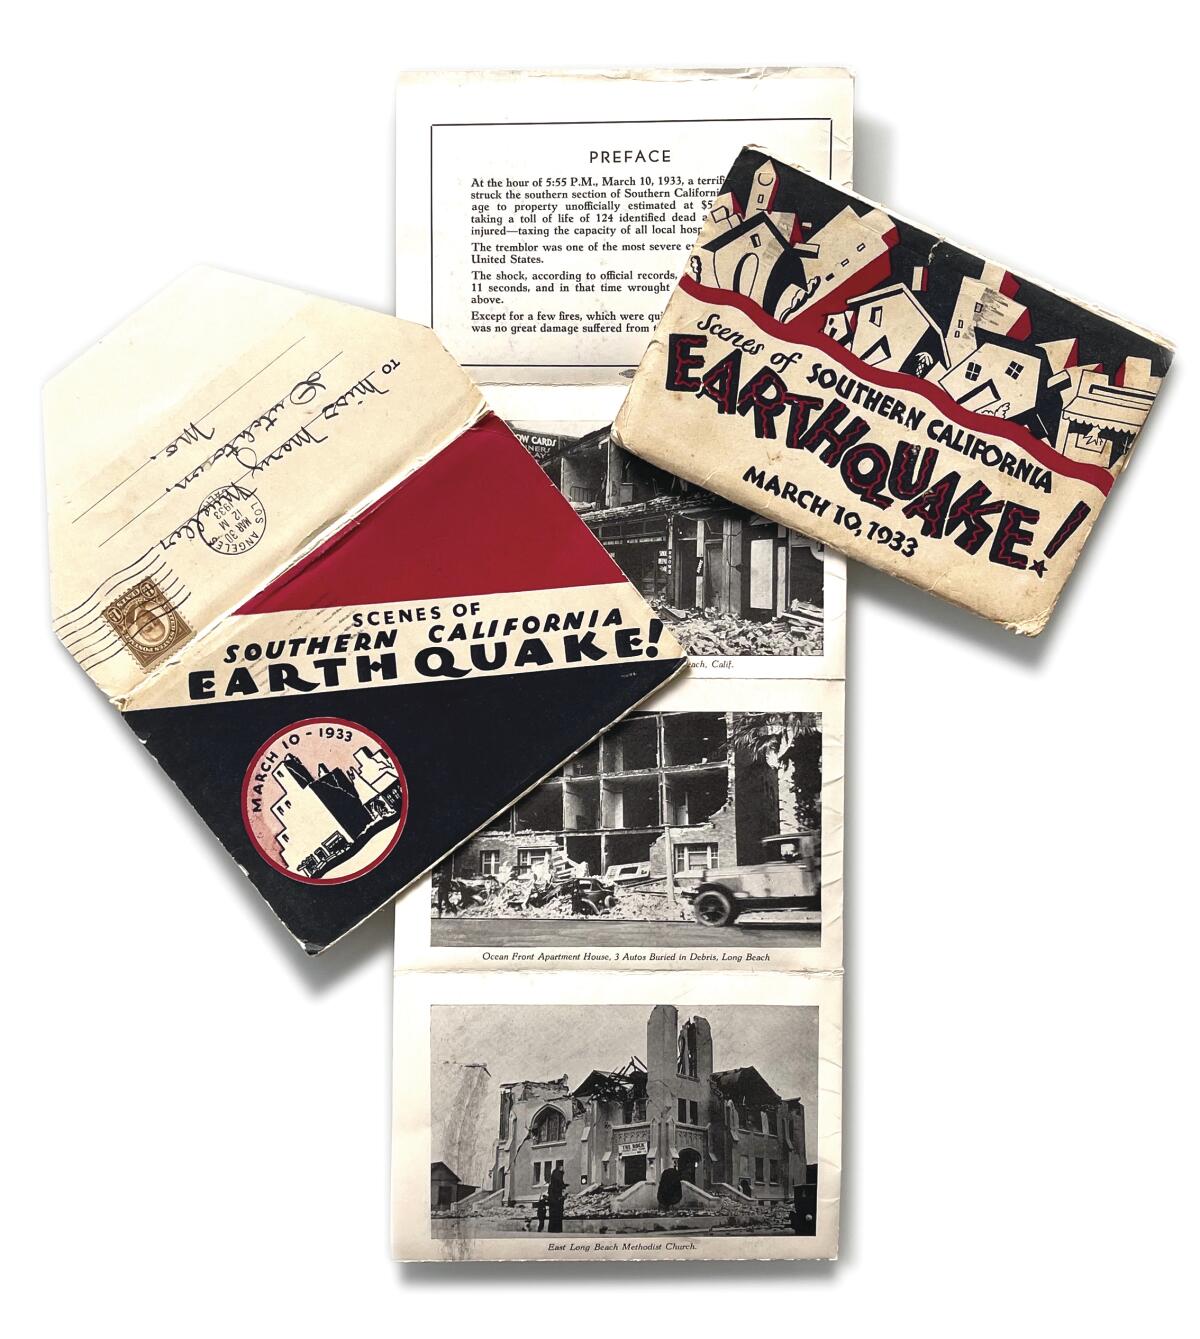 Historical memorabilia from Patt Morrison's collection shows some of the damage from the 1933 Long Beach earthquake.